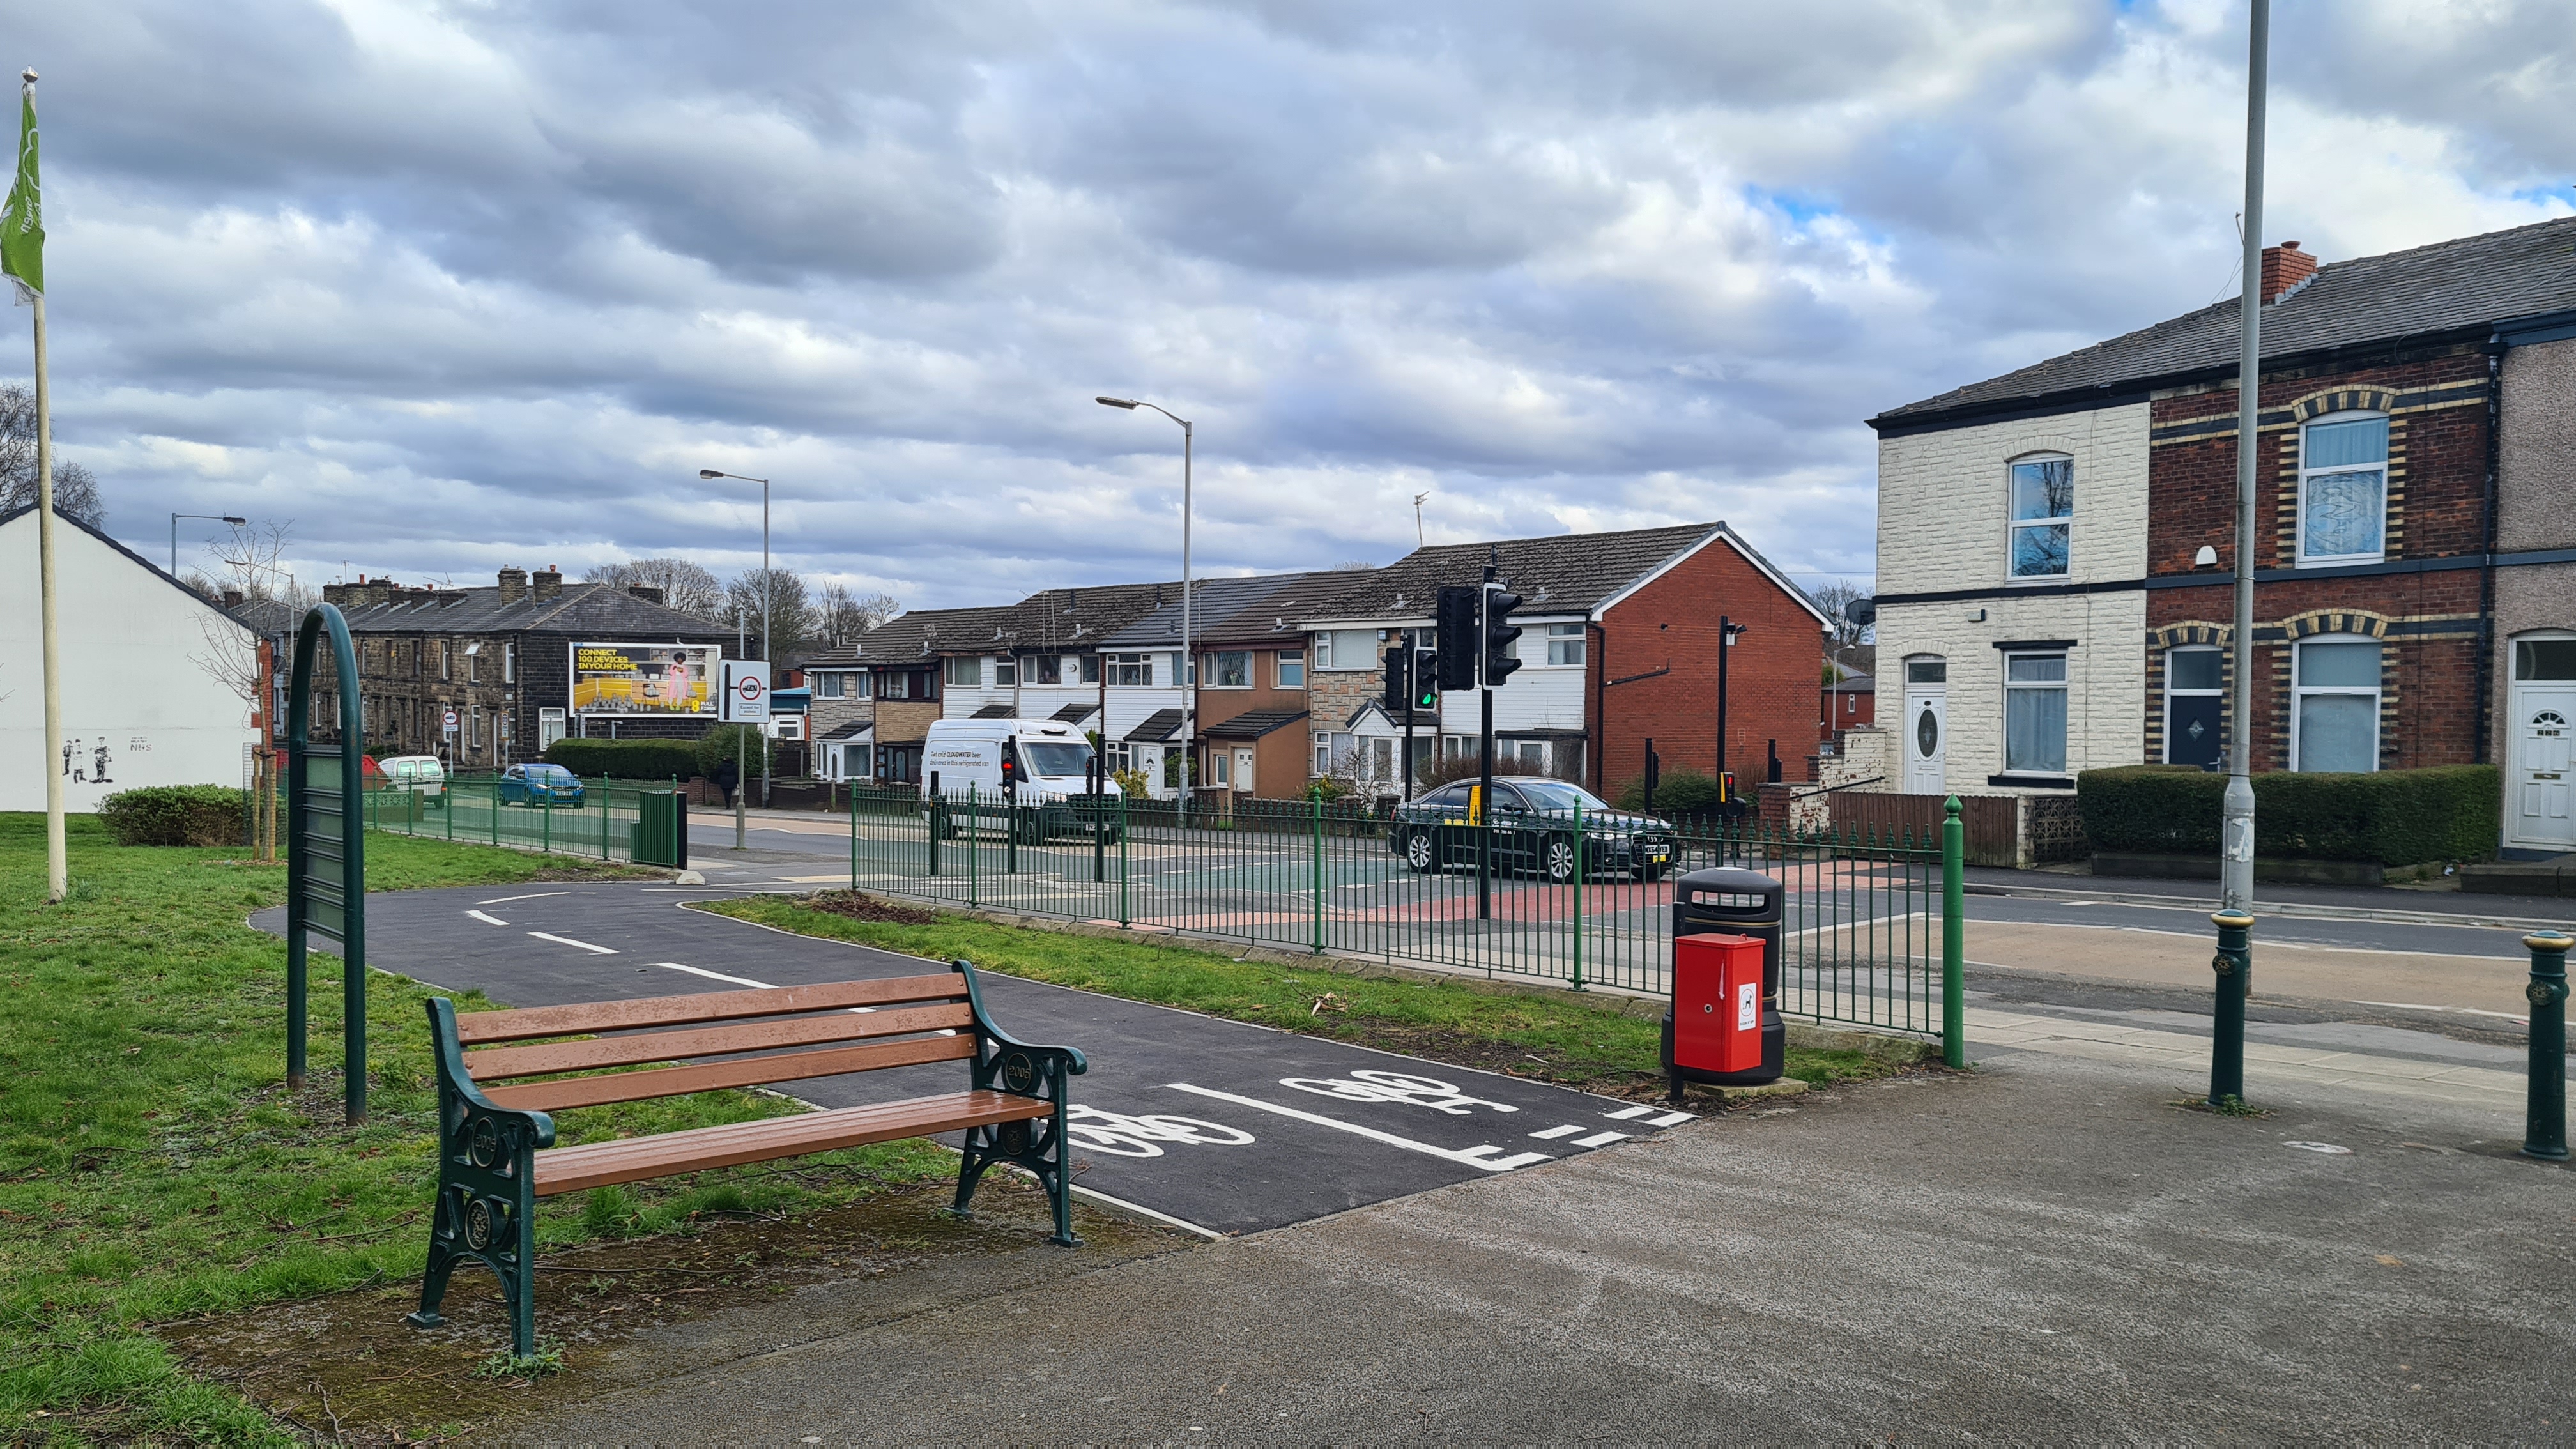 A new signalised crossing at the entrance of Hoyles Park